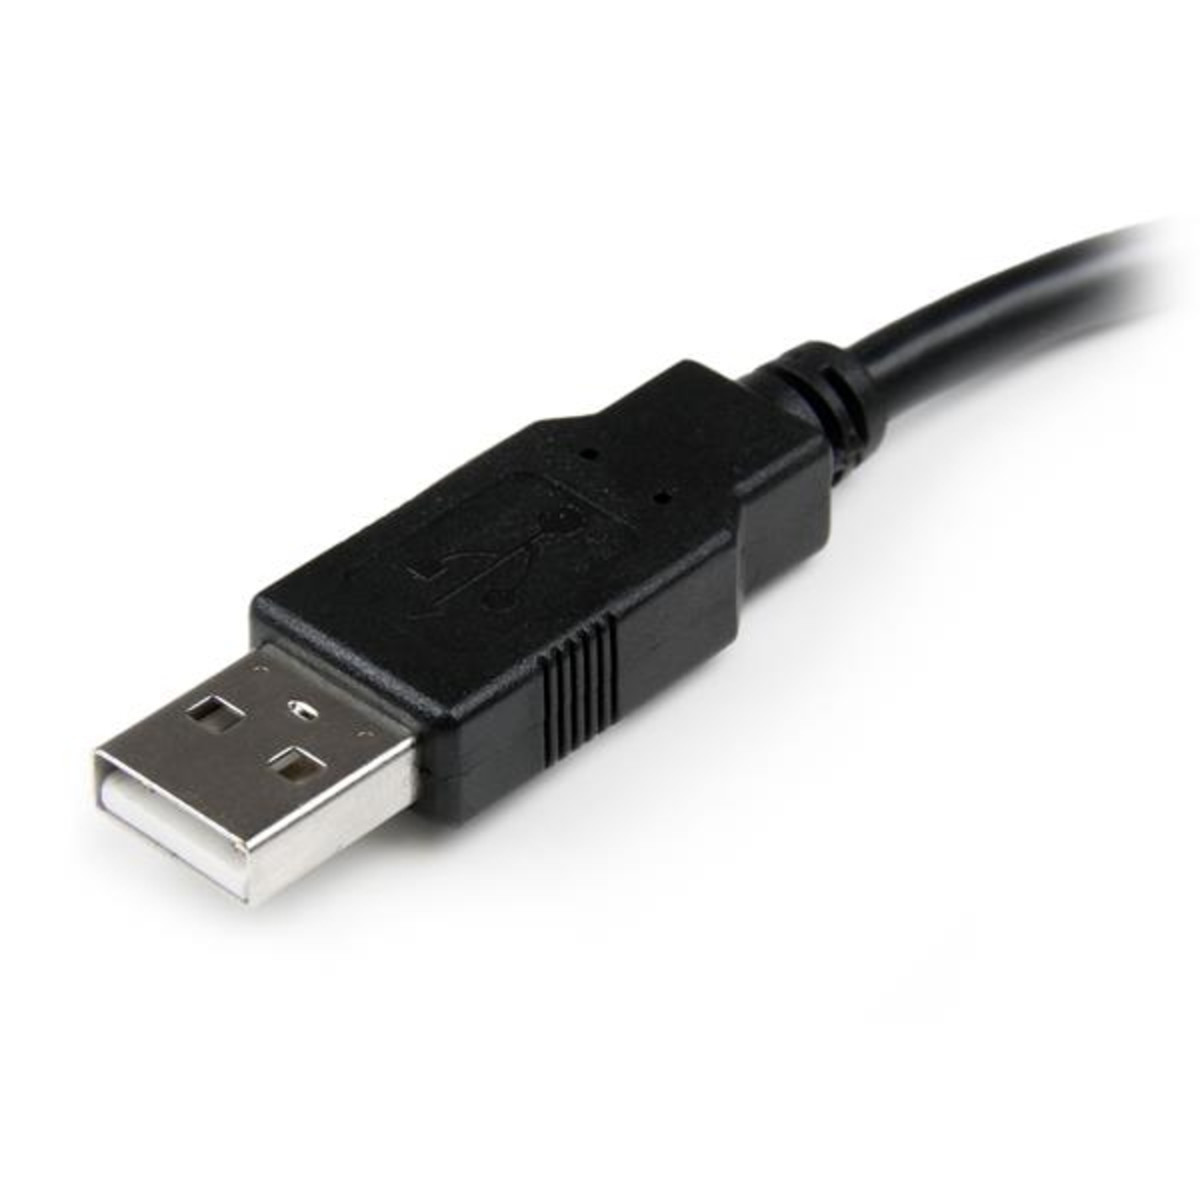 6in USB 2.0 Extension Adapter Cable